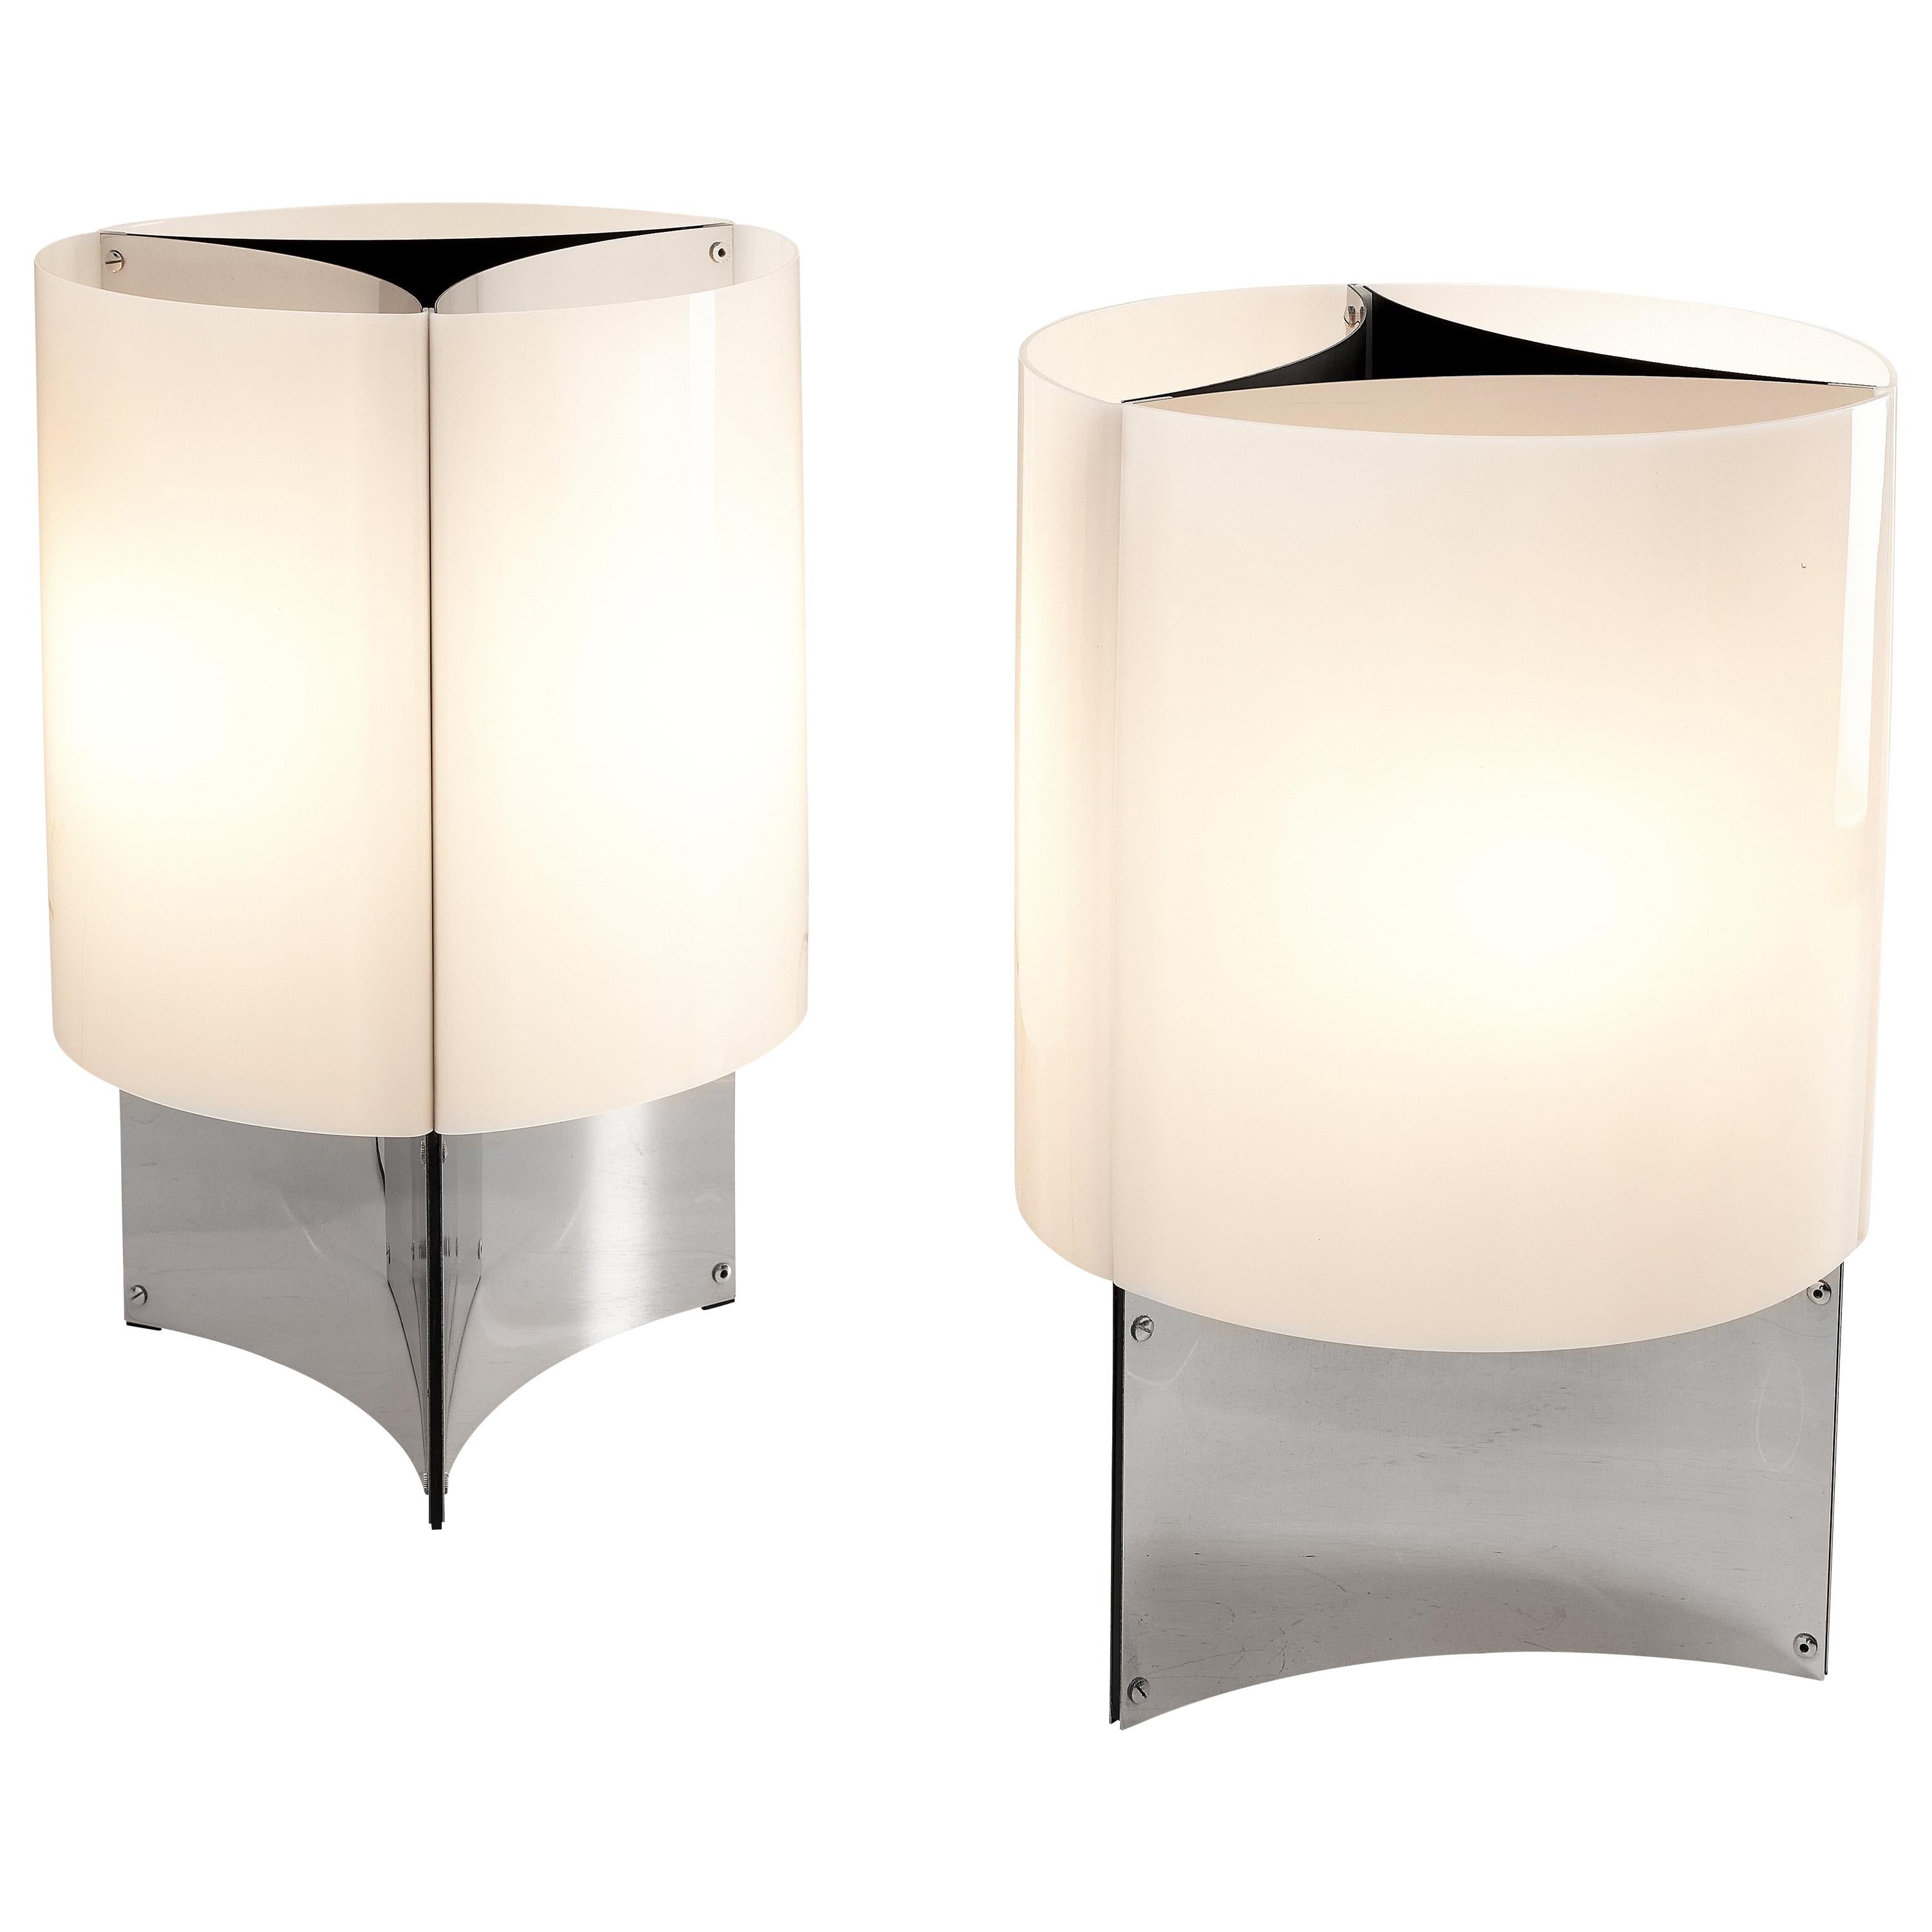 Massimo Vignelli for Arteluce Pair of Table Lamps Model 526